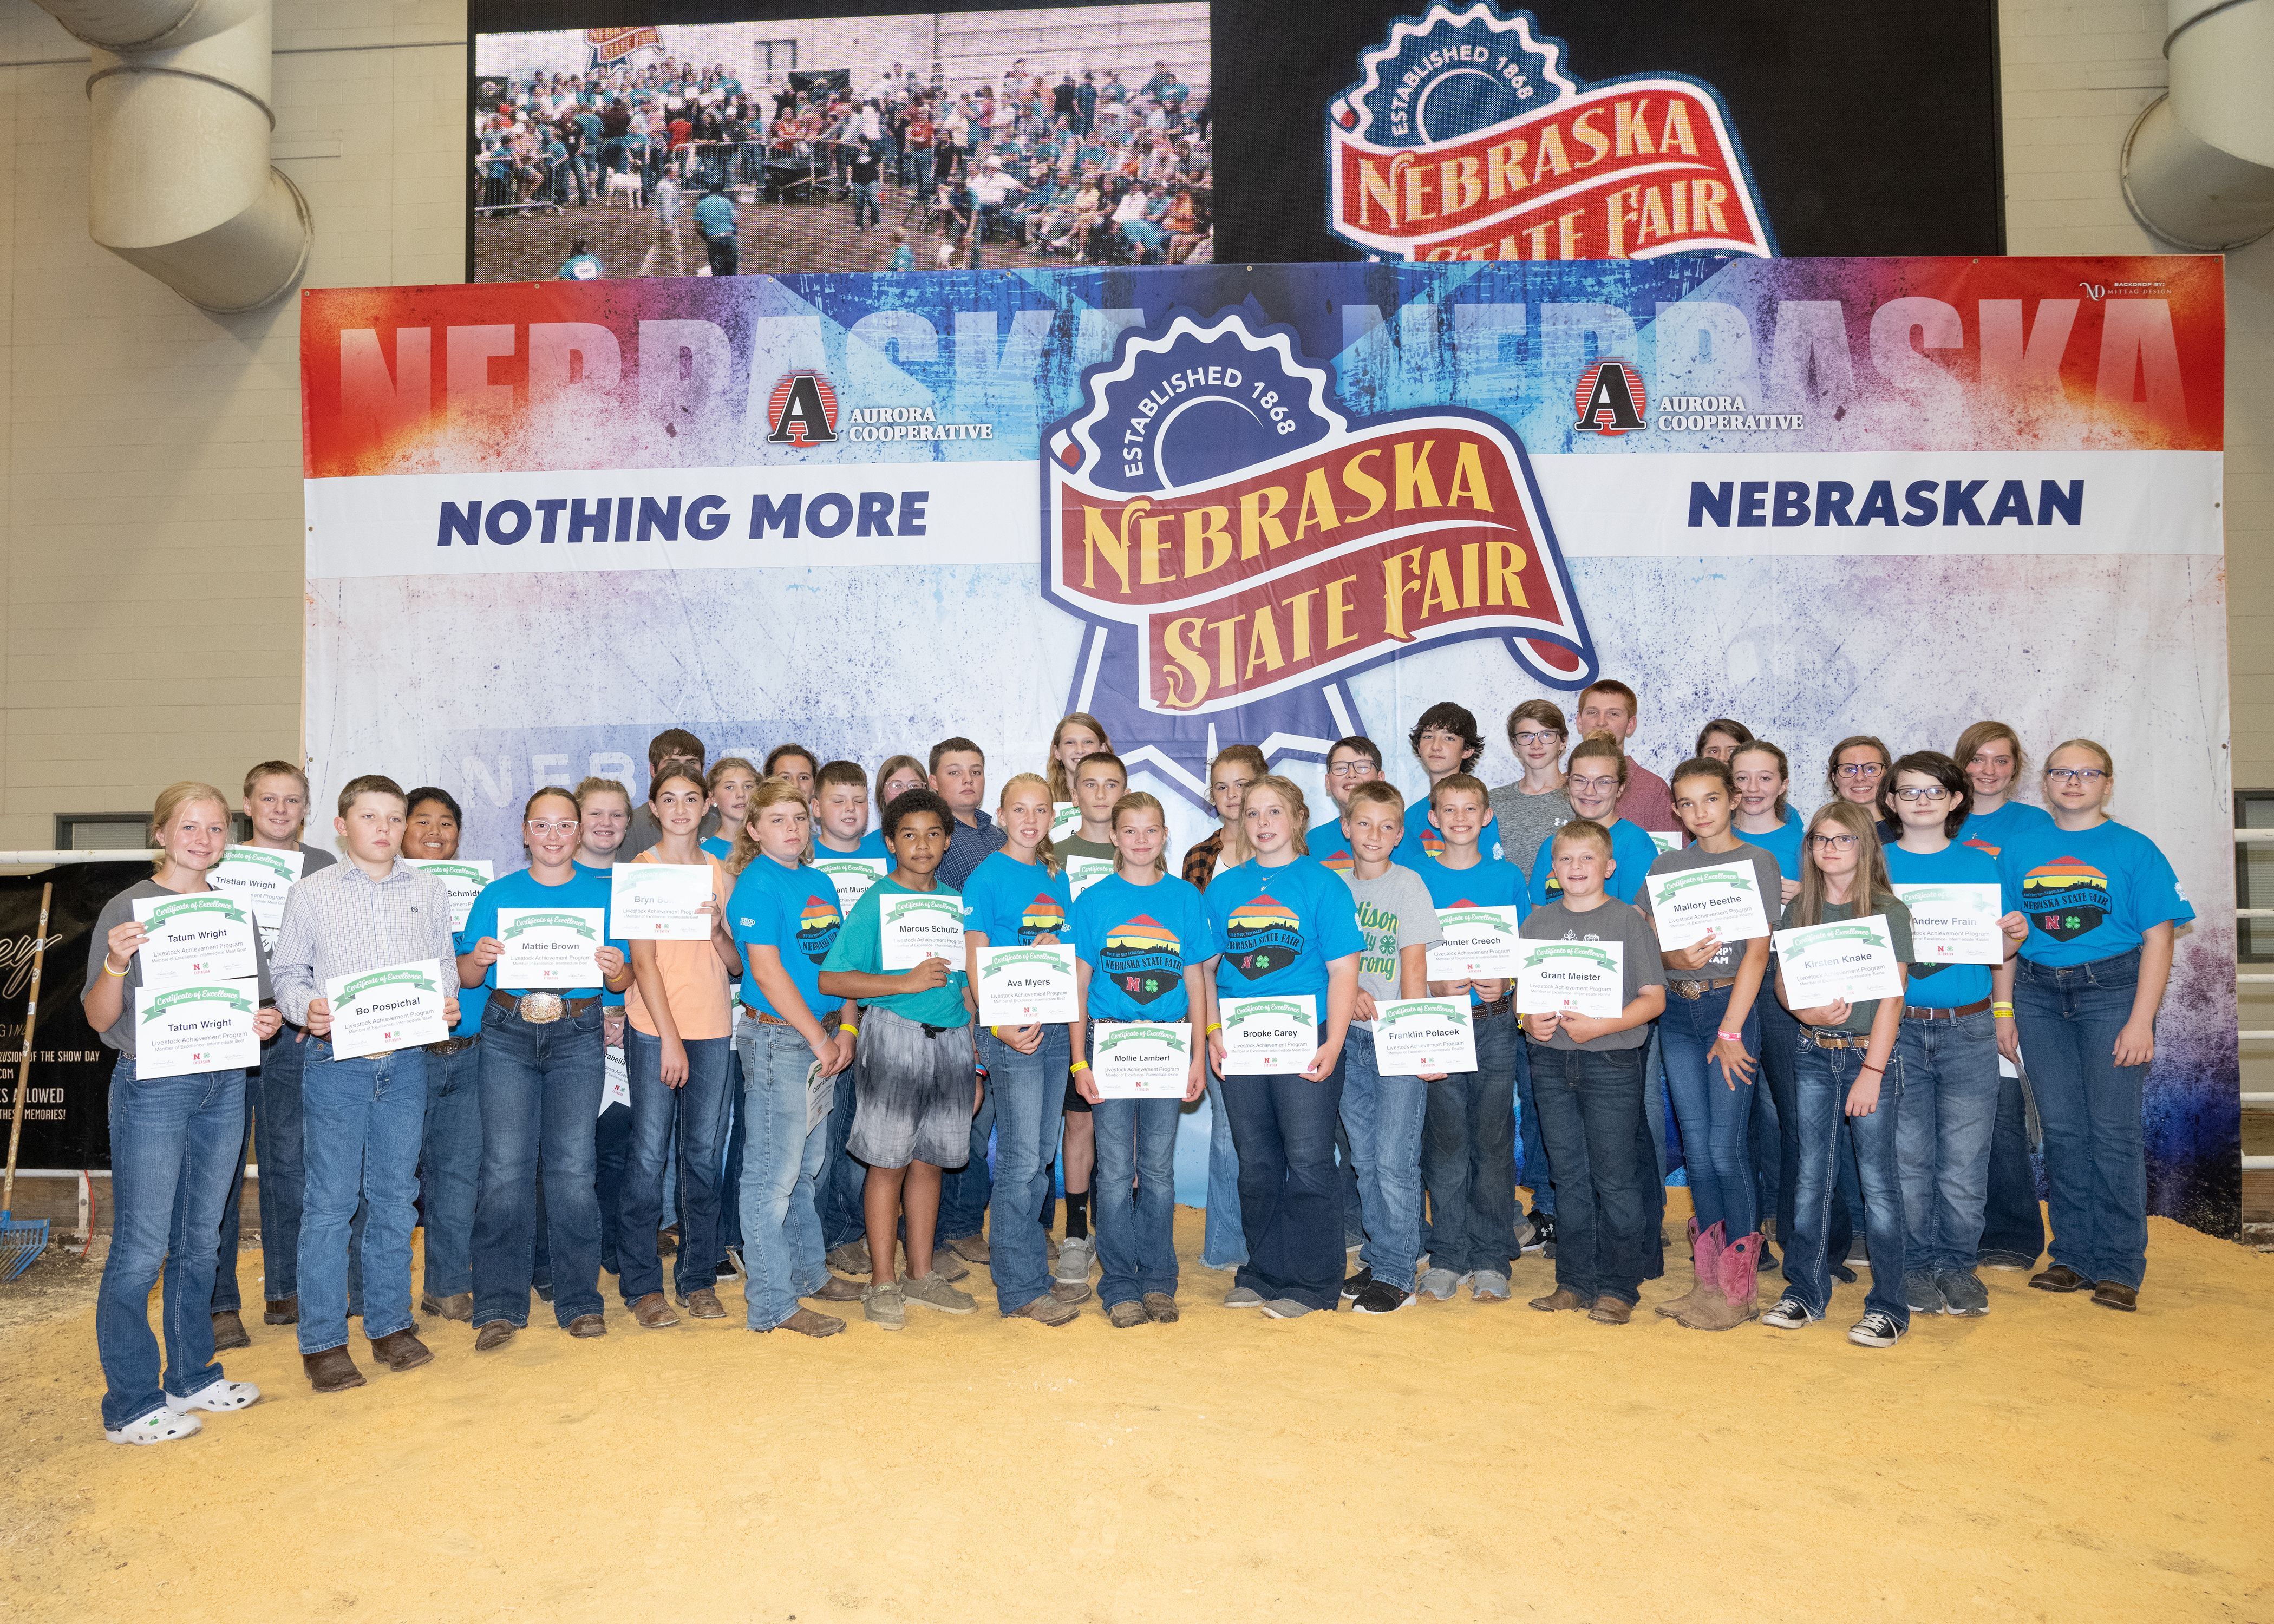 Fifty-two youth were recognized as Members of Excellence at the 2022 Nebraska State Fair.